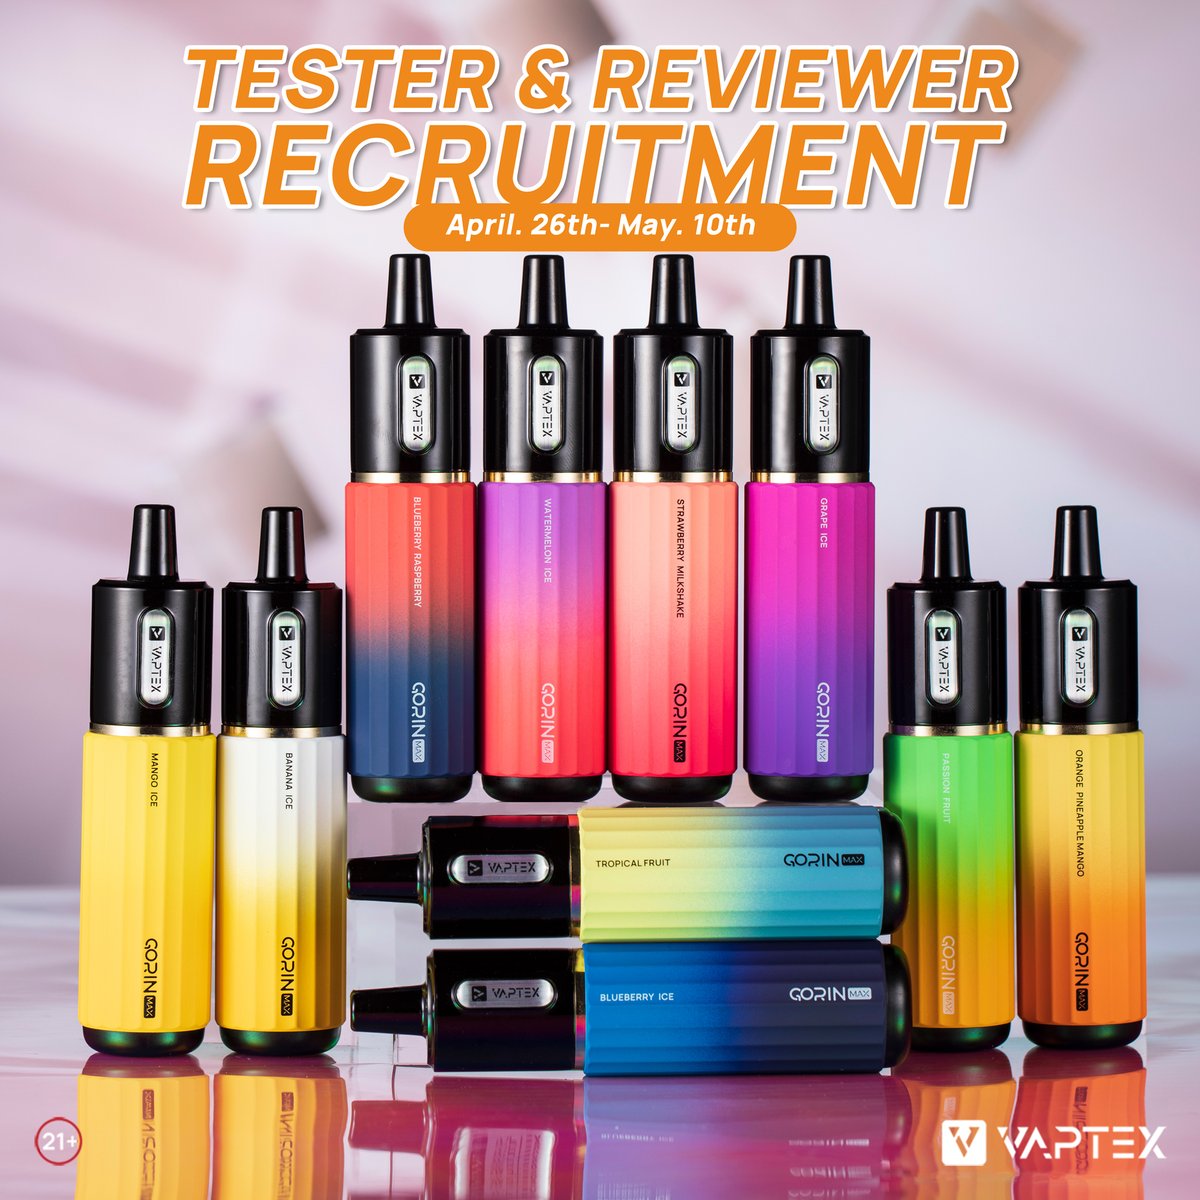 #VAPTEXCampaign Tester & Reviewer RECRUITMENT 🎉
Wanna be the first one to test it? Come join us now!
.
💥How to enter?
1. Follow us & retweet this post
2. Comment with your ideas about it #Gorinmax
.
vaptexworld.com/product/gorinm…
#vapegiveaway #newrelease